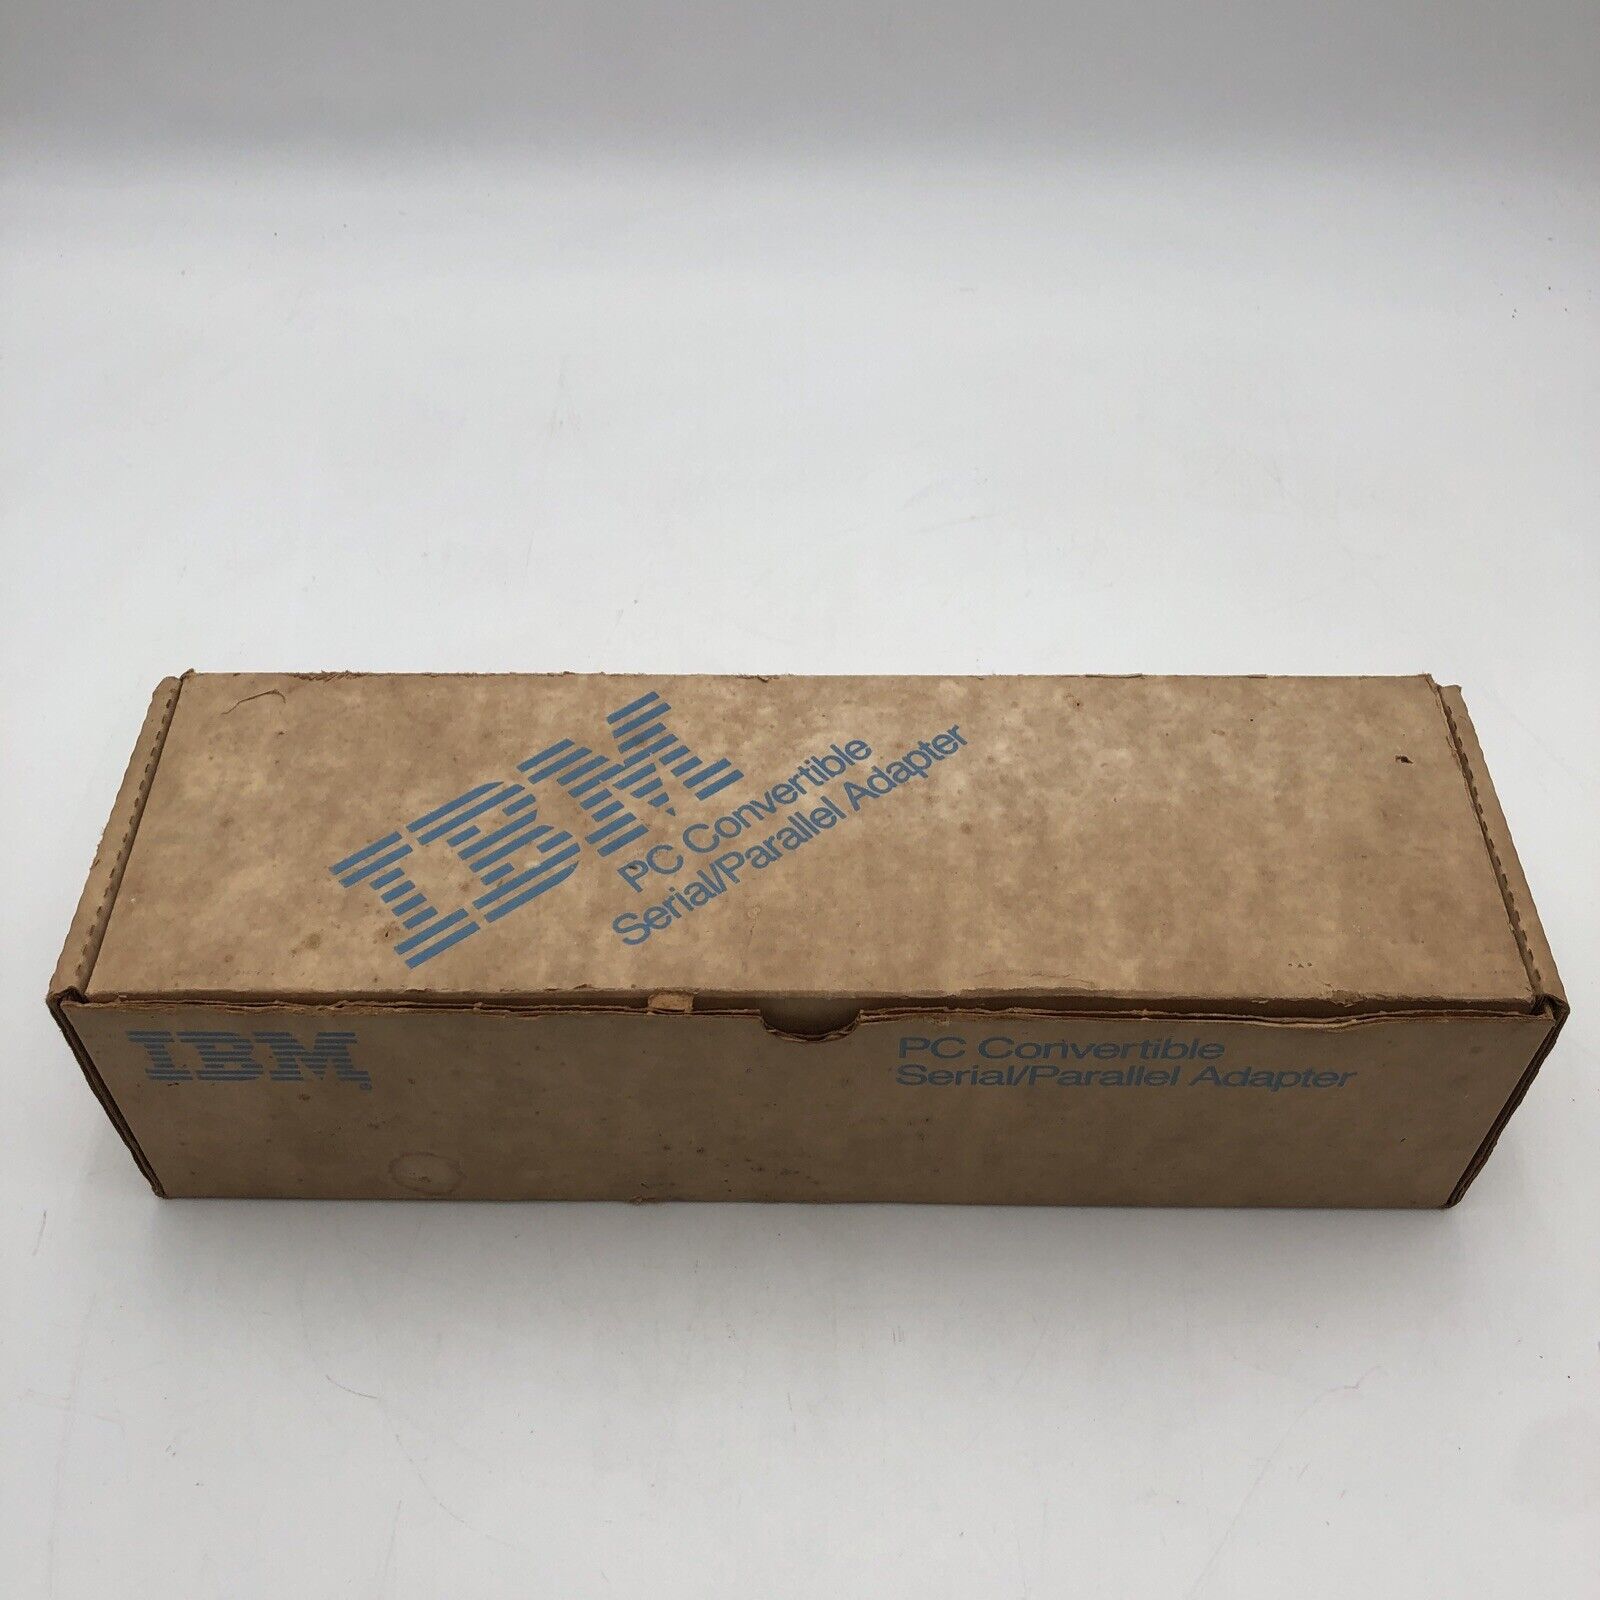 Vintage IBM PC Convertible Serial/Parallel Adapter New Old Stock READ